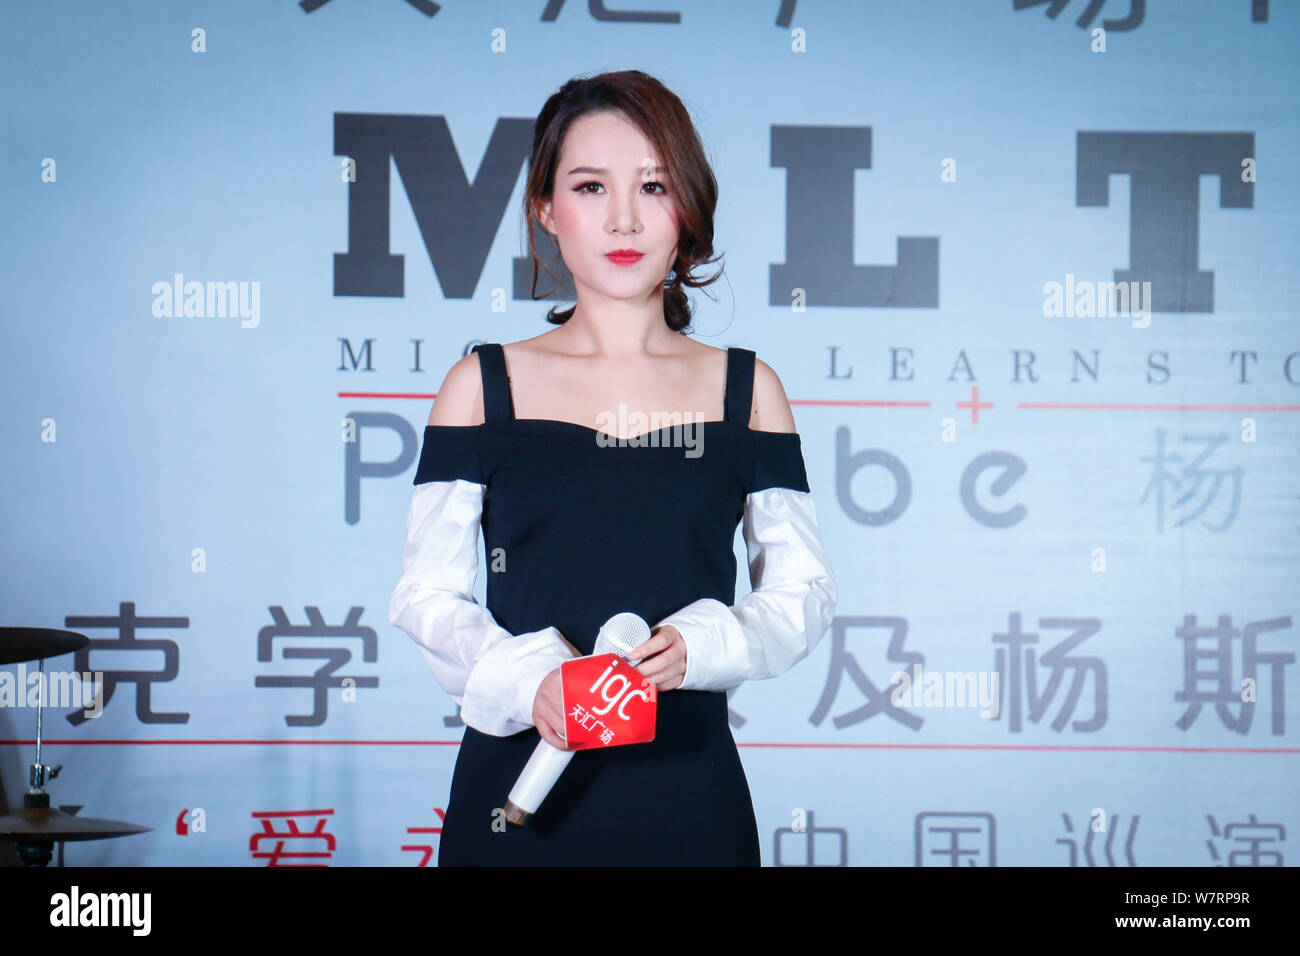 Chinese singer Phoebe Yang or Yang Sijie attends a press conference to promote the China concert tour of Danish rock band Michael Learns to Rock (MLTR Stock Photo